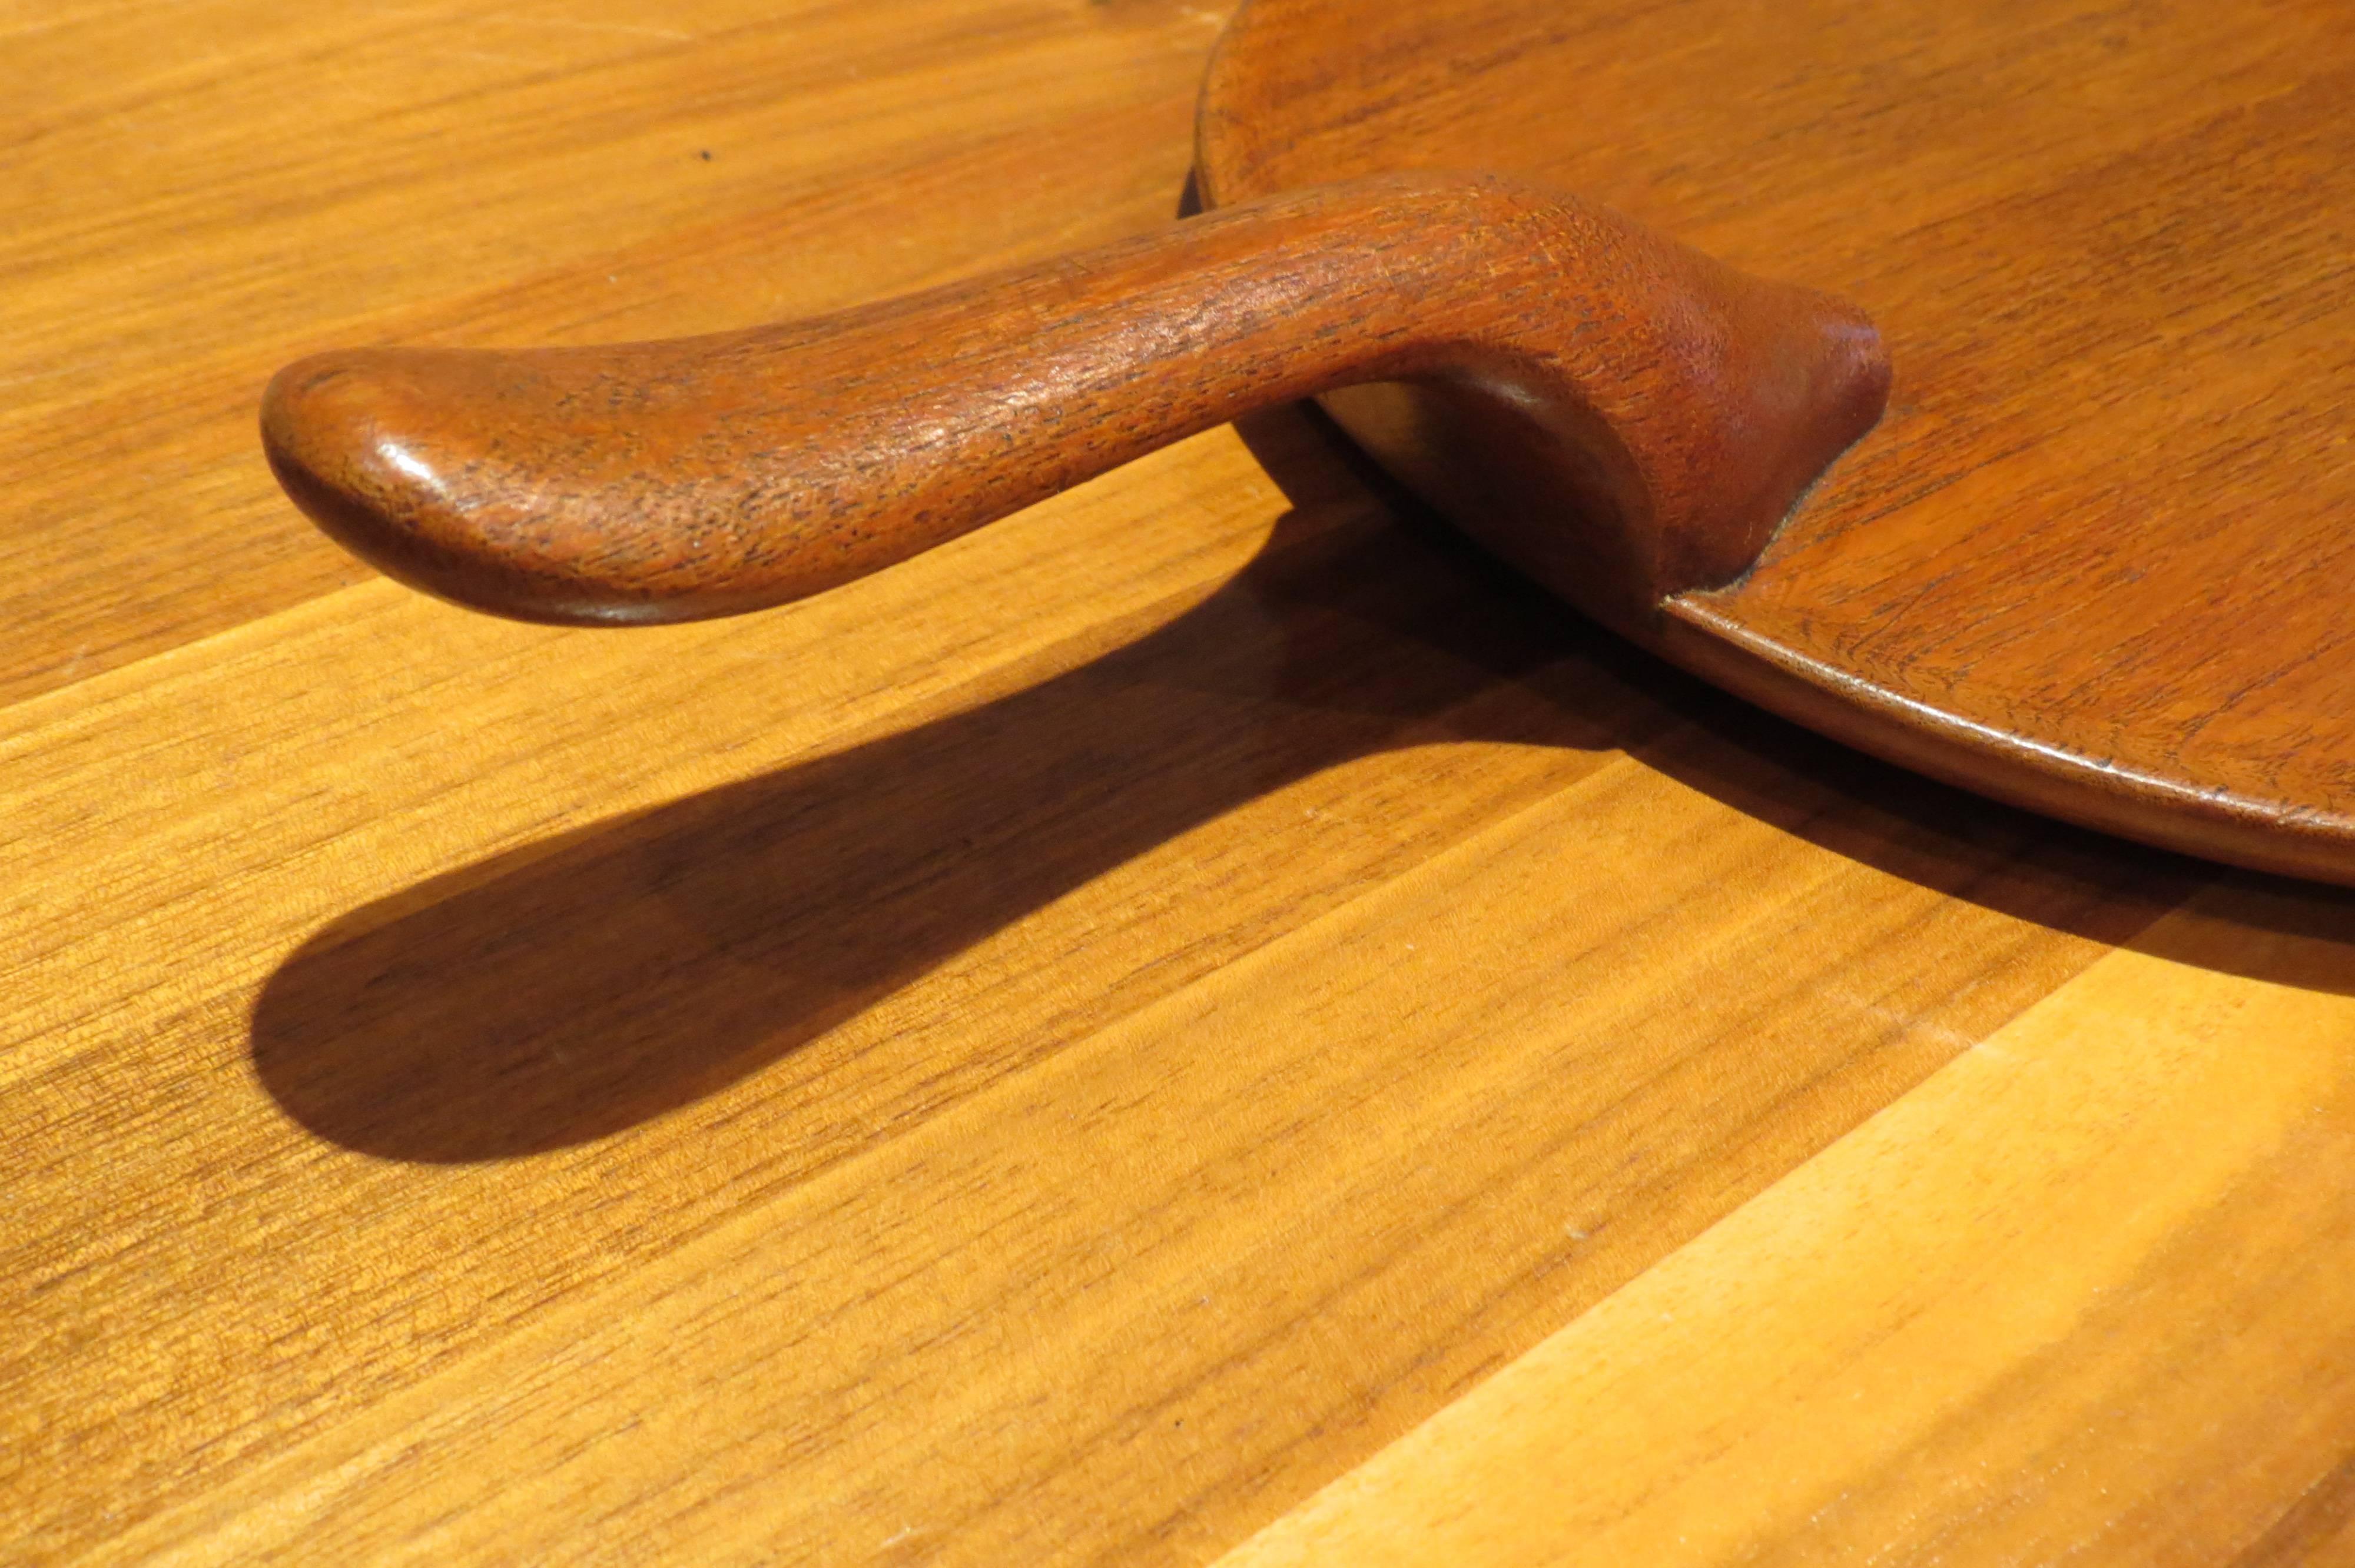 Woodwork 1960s Teak Serving Tray with Handle by Kay Bojesen